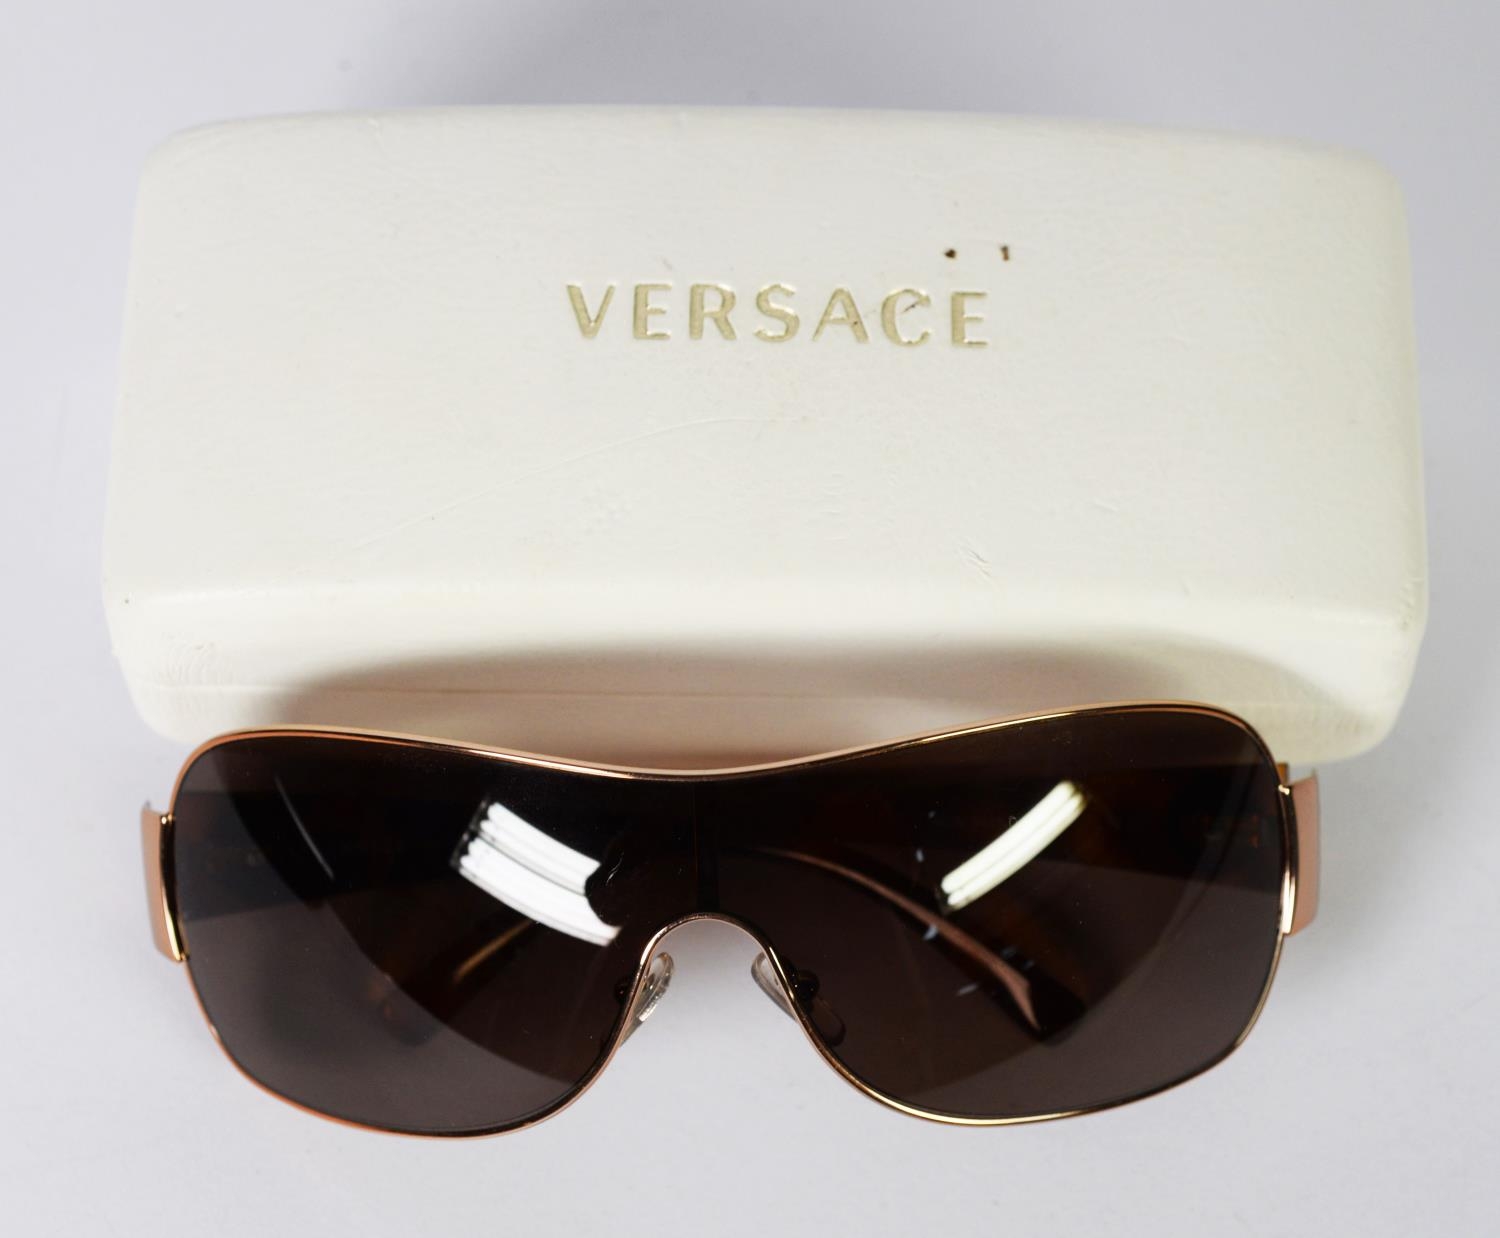 PAIR OF VERSACE-ITALY SUNGLASSES MODEL No. 2078, having gilt framed dark grey lenses, with simulated